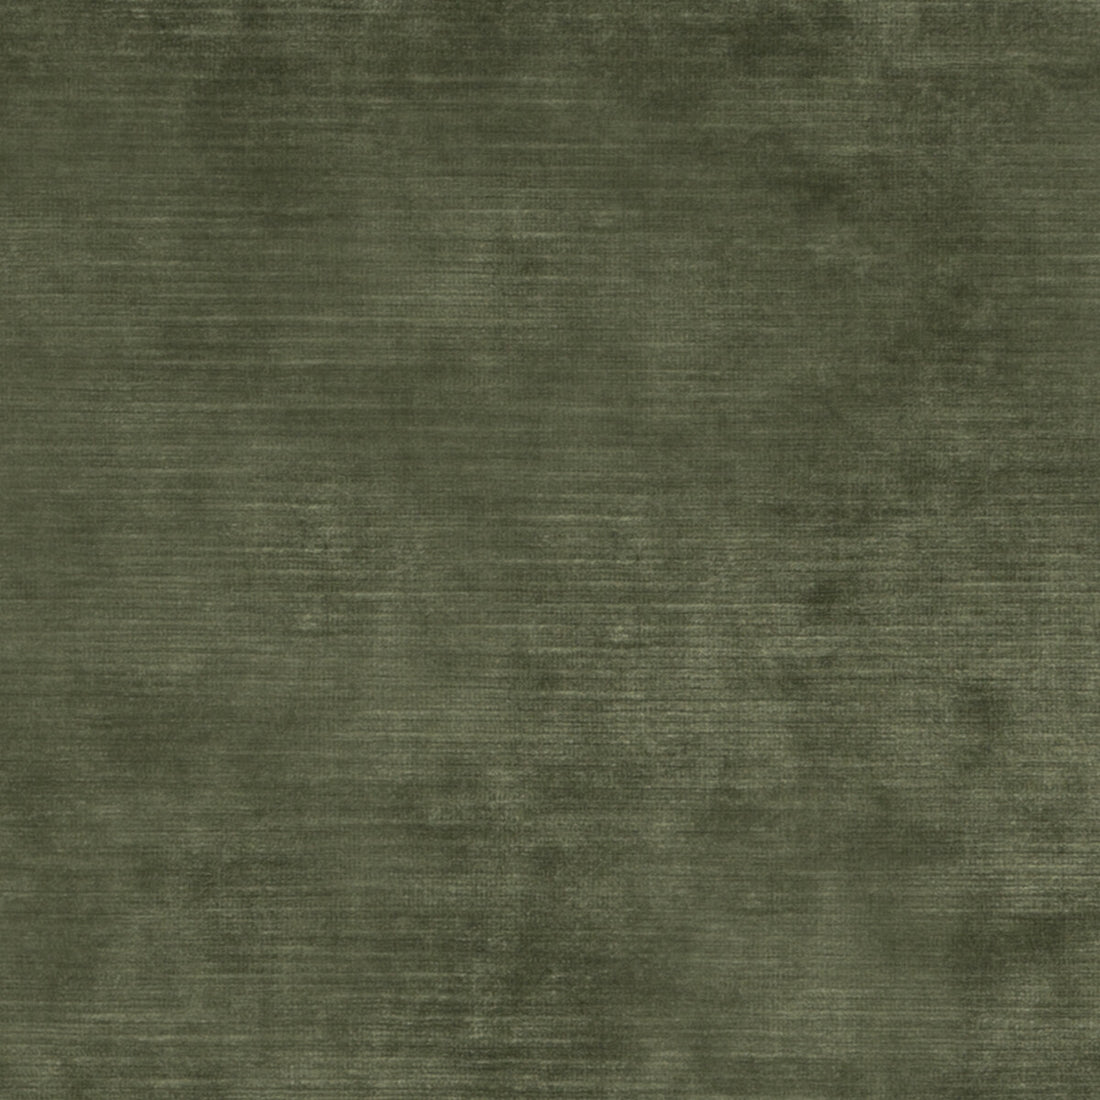 Meridian Velvet fabric in fern color - pattern ED85292.775.0 - by Threads in the Meridian collection